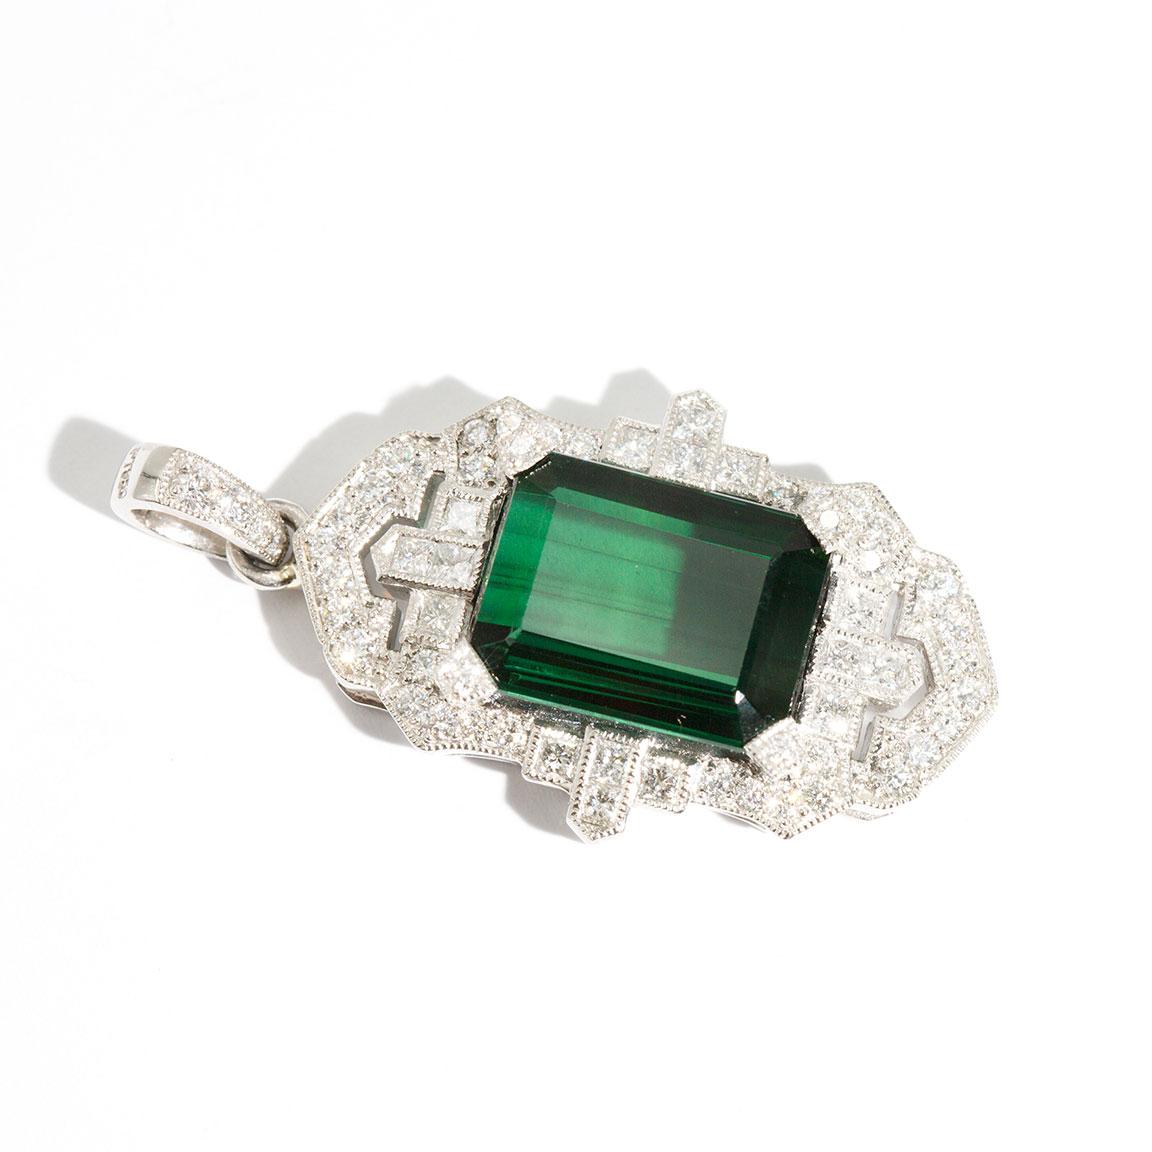 Carefully crafted in platinum, this opulent Art Deco inspired pendant boasts a breathtaking flawless 11.84 carat modified emerald cut Tourmaline beset with an intricate border of round brilliant cut and princess cut diamonds totaling 1.40 carats. We